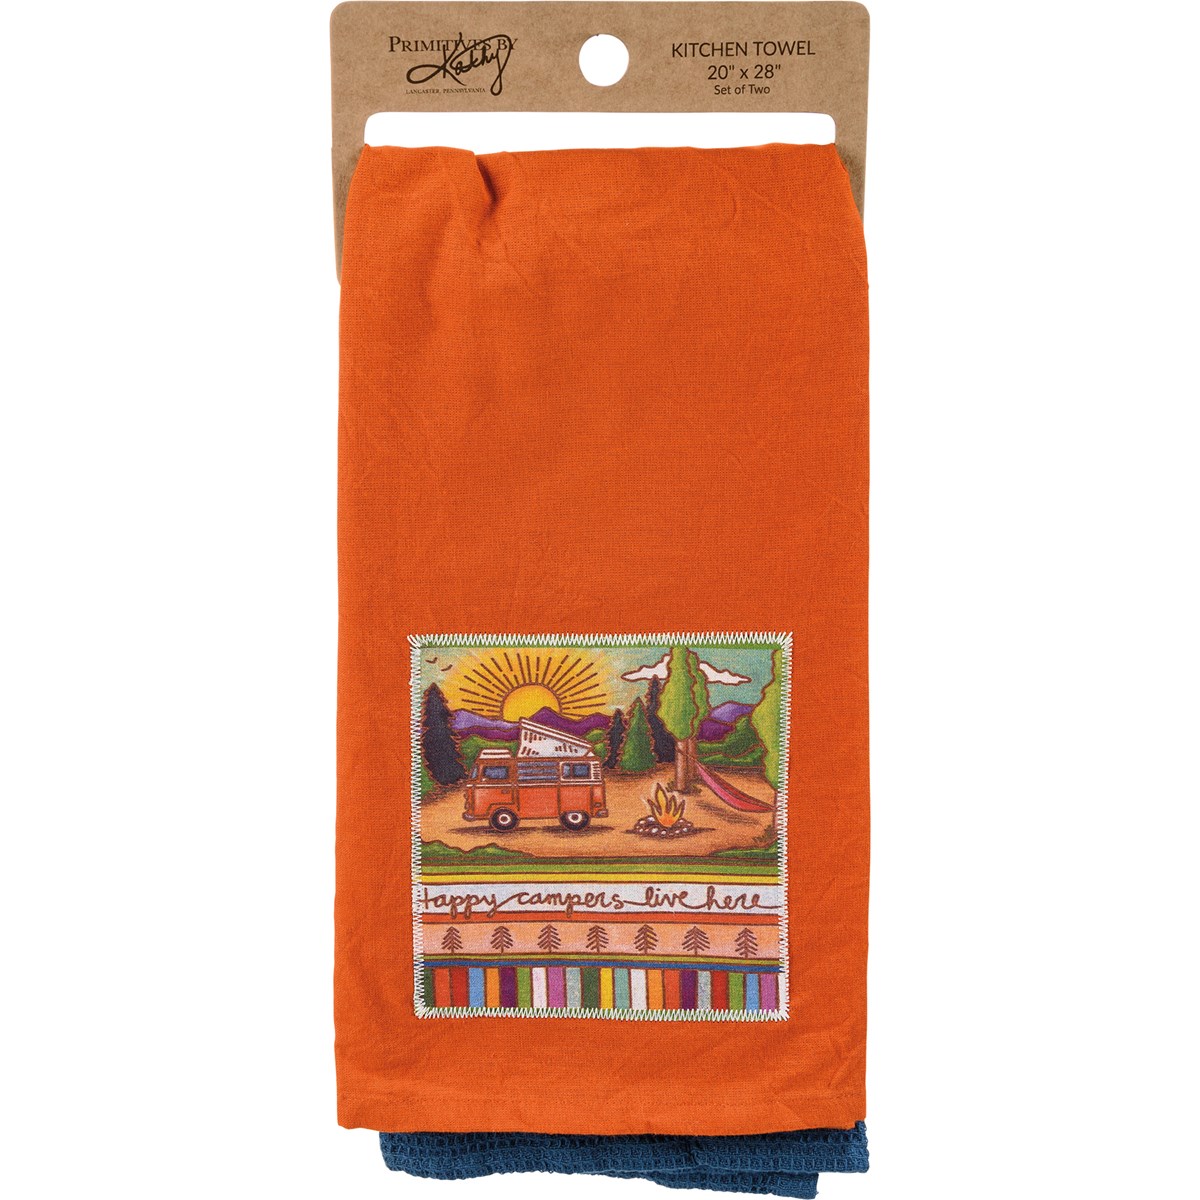 Happy Campers Live Here Kitchen Towel Set - Cotton